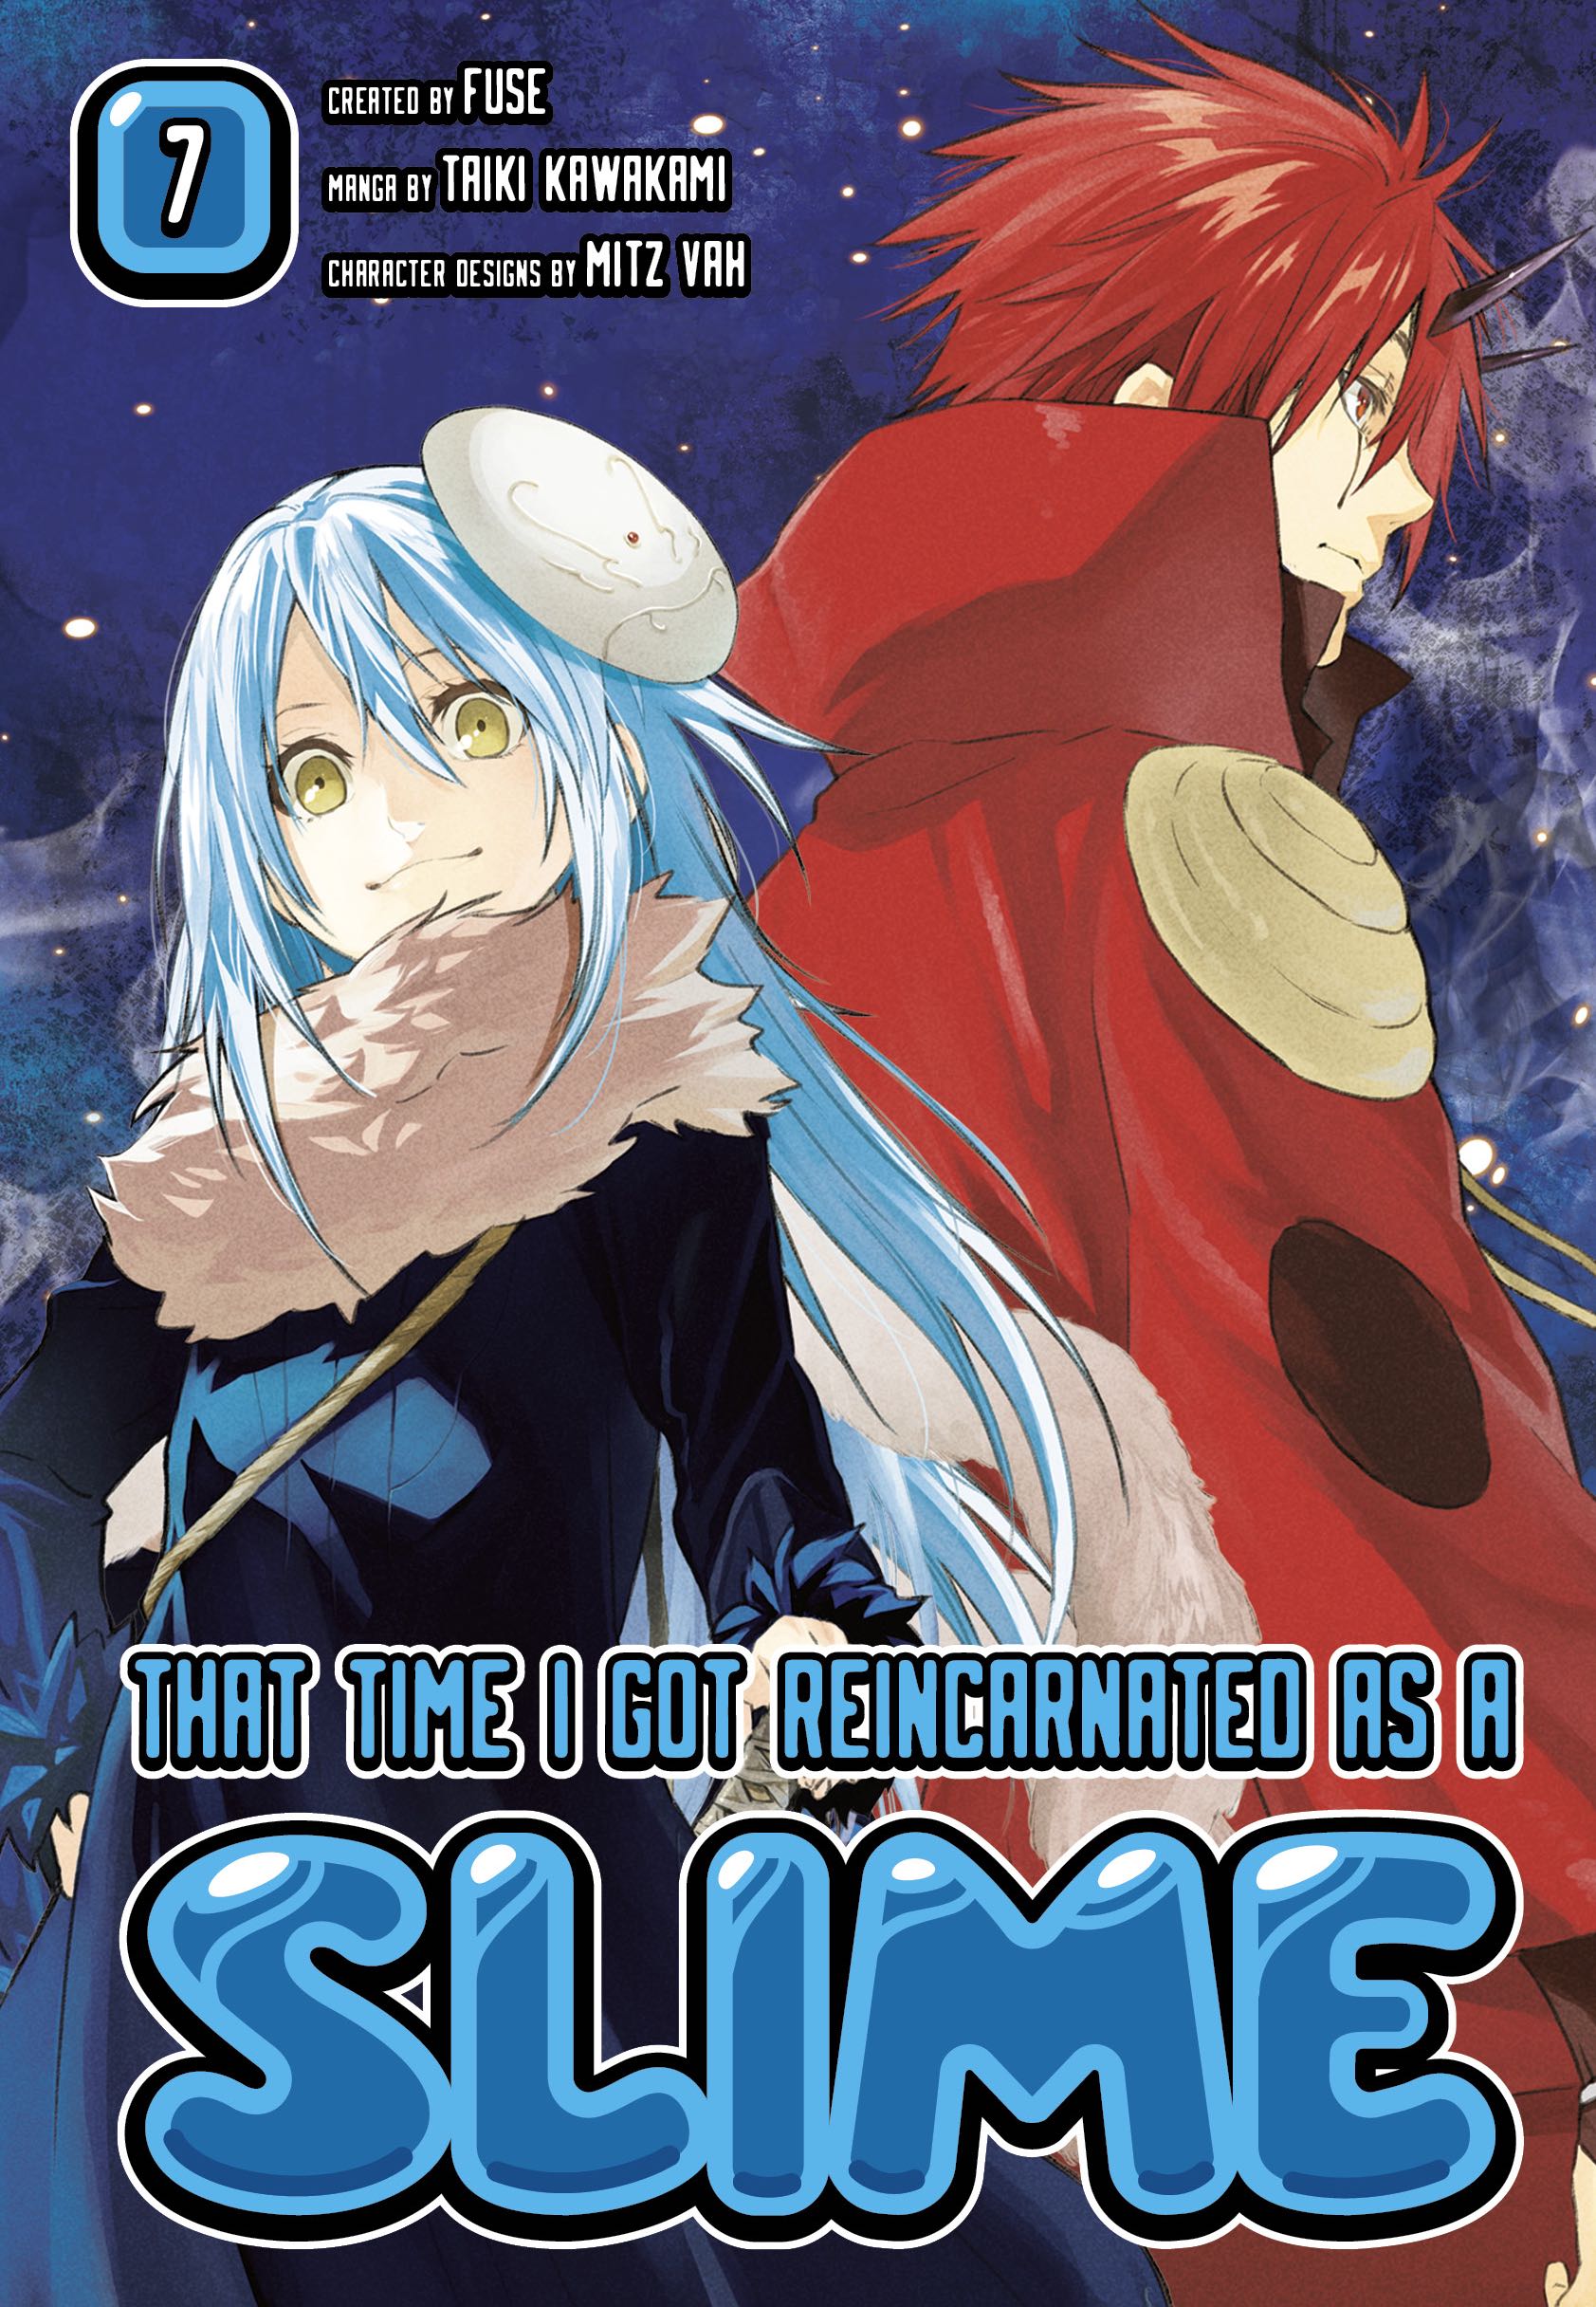 That Time I Got Reincarnated as a Slime Season 2 Episode 2 Release Date